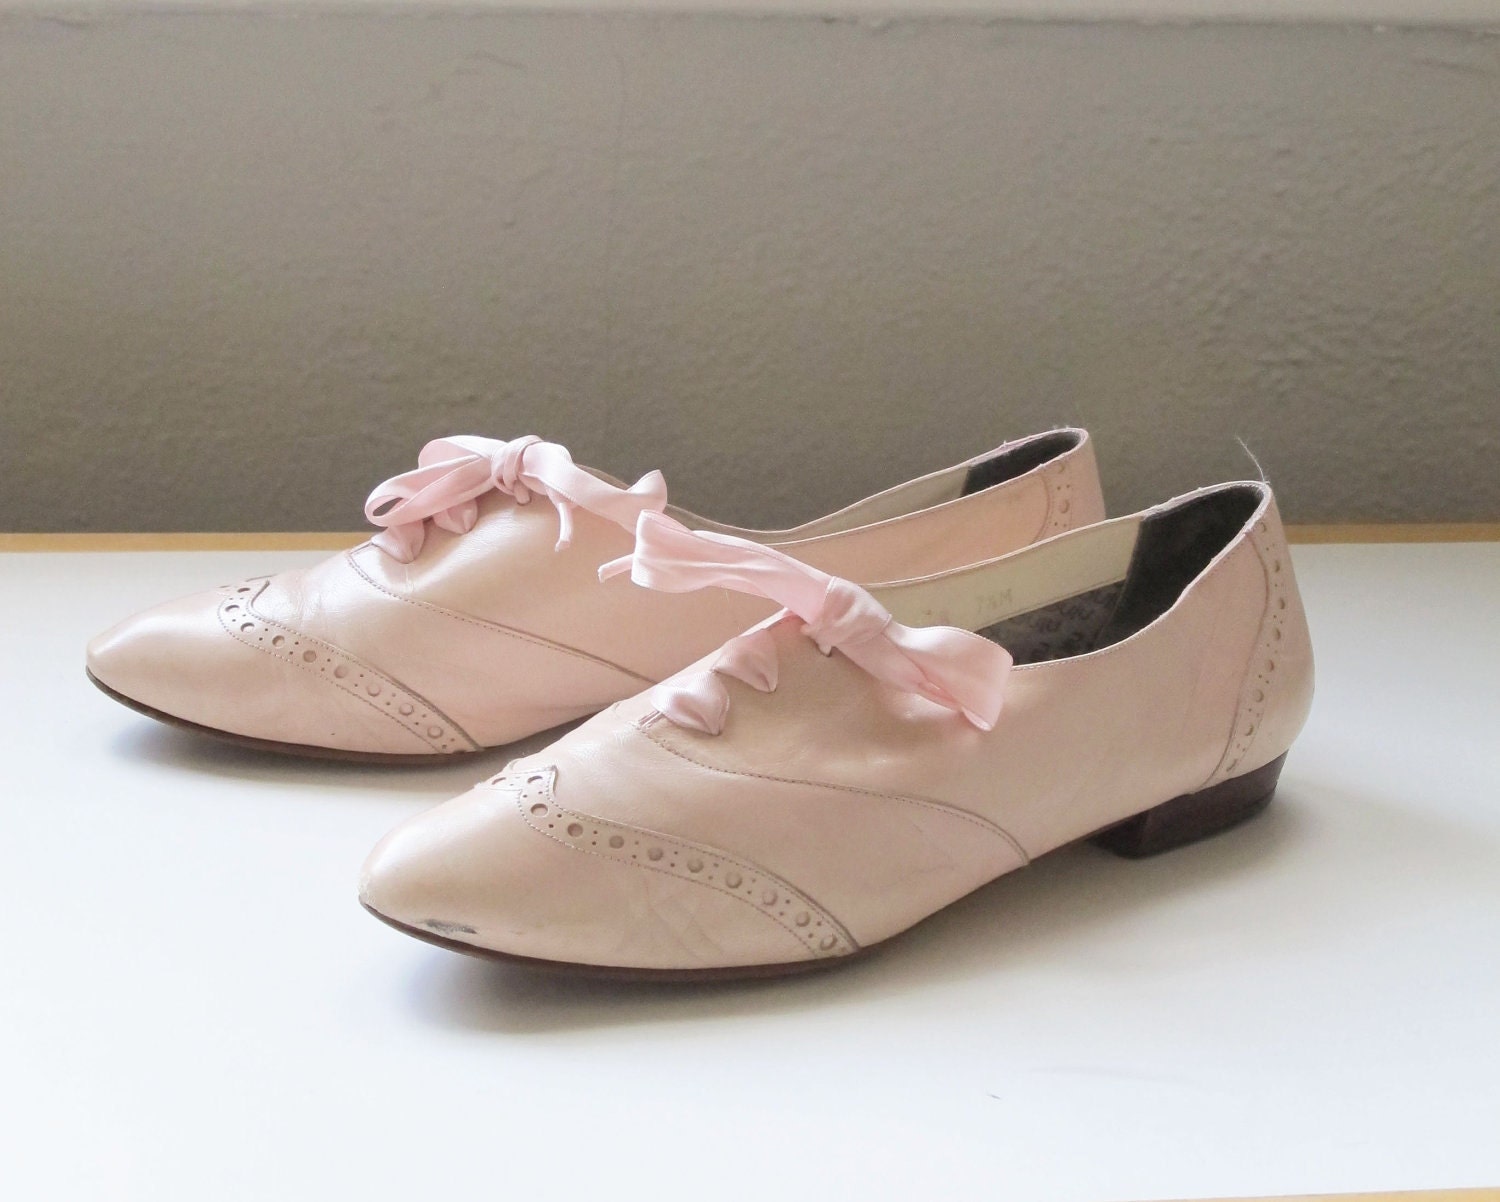 Shoes / Oxford / Pale / Pink / Flats / Lace up / Size 7.5